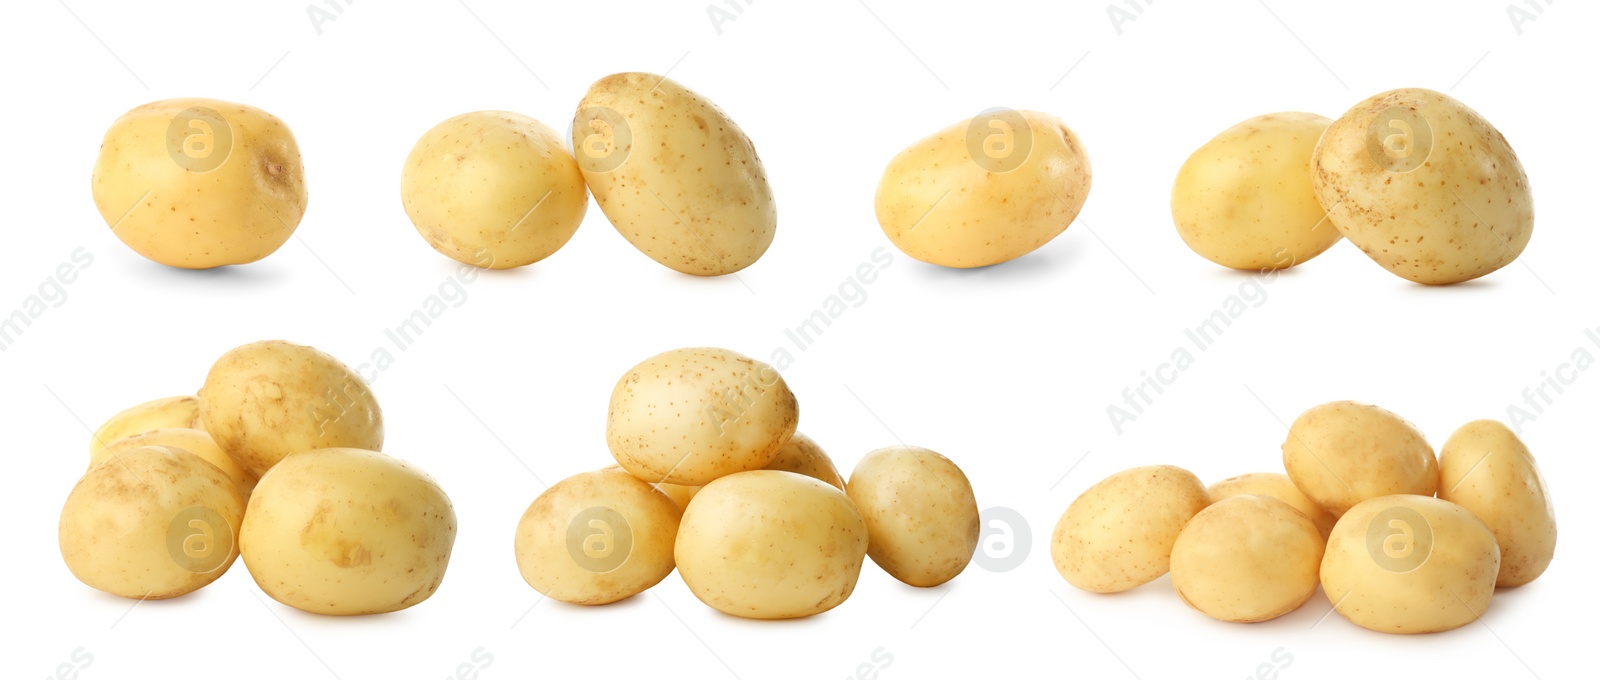 Image of Collage with fresh raw potatoes on white background